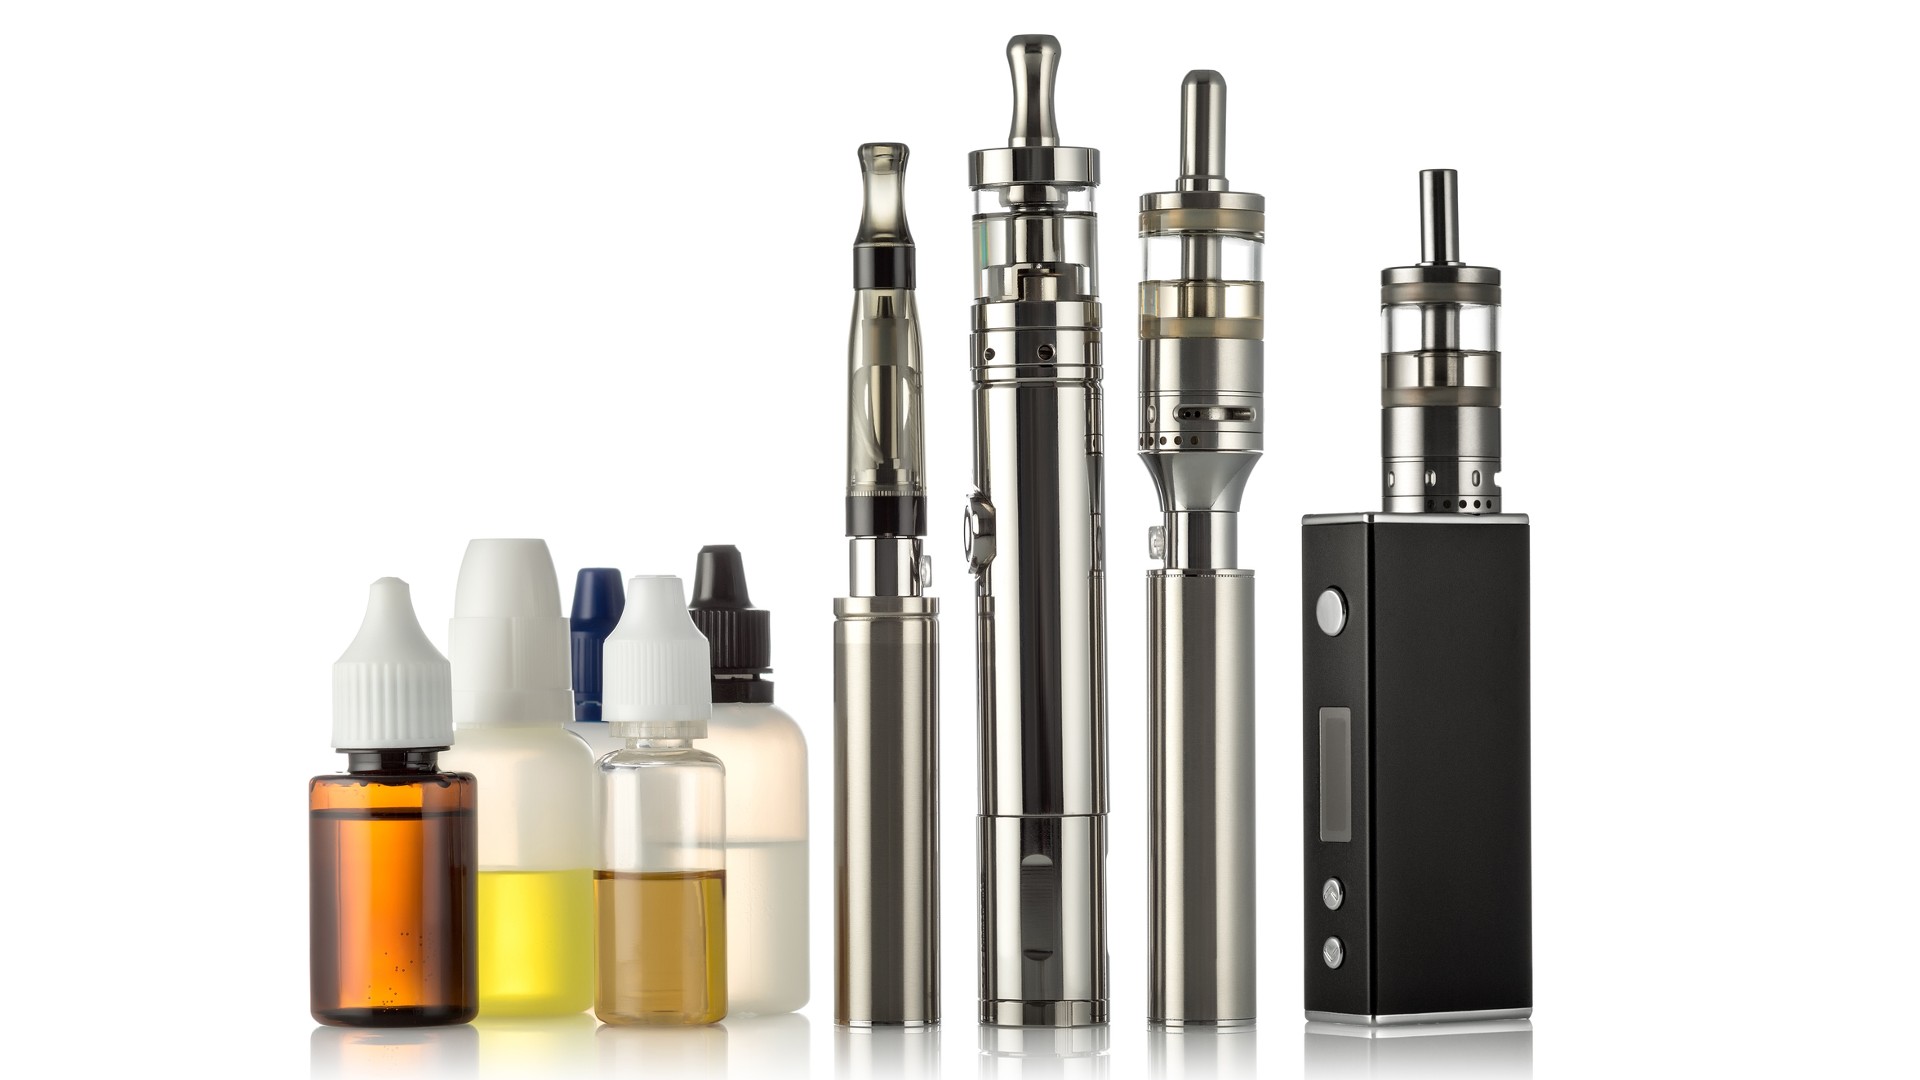 Collection of 4 different electronic cigarettes/vape pens and 5 different bottles of vape liquid on a white background.